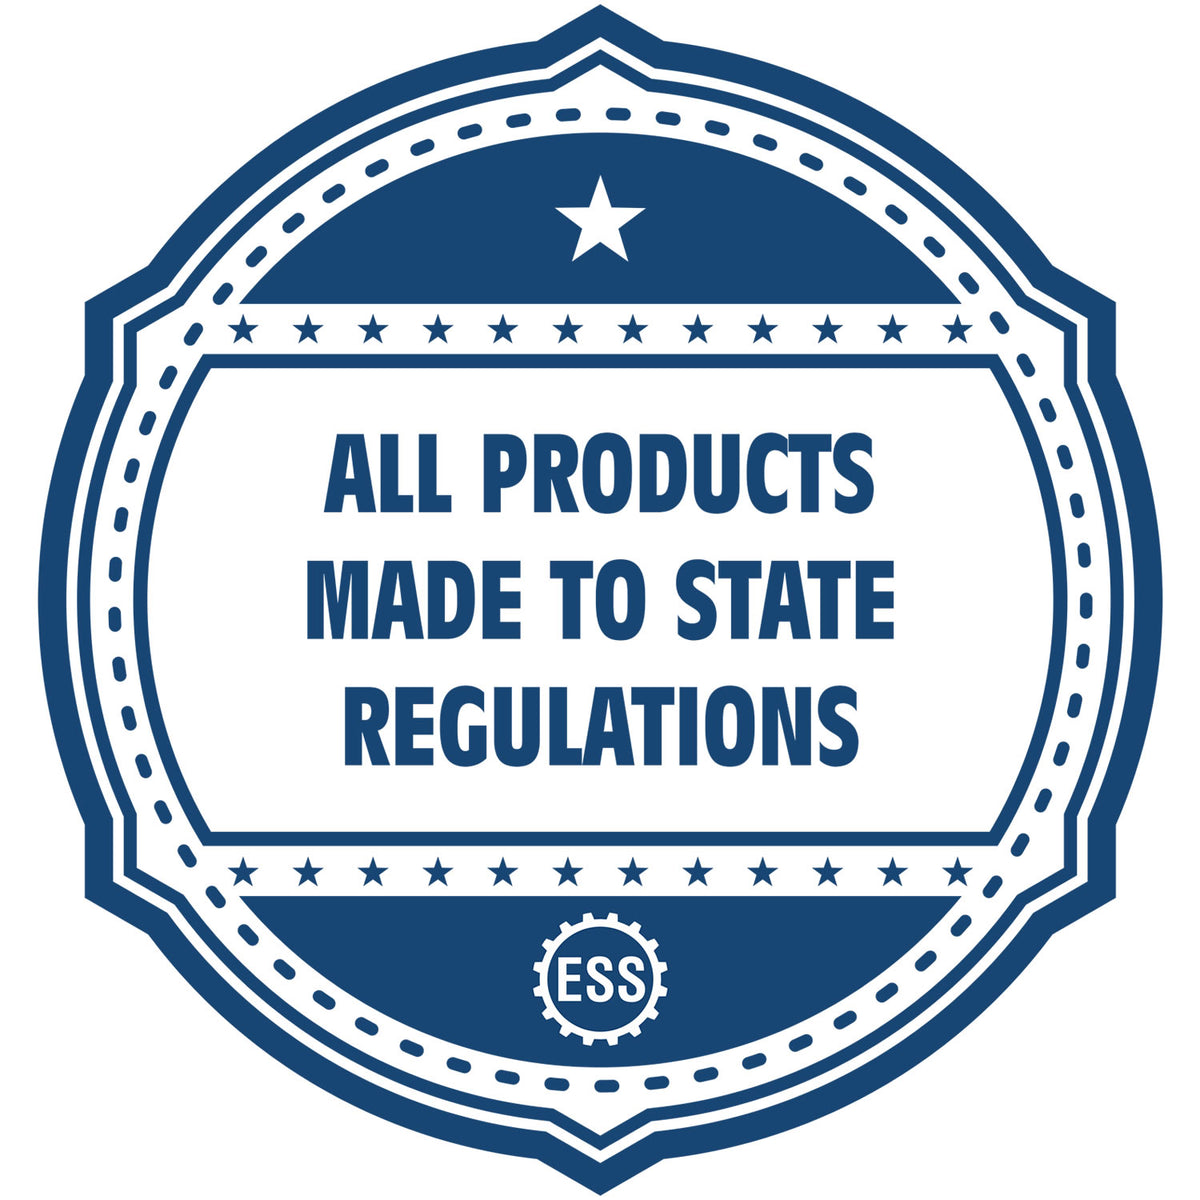 An icon or badge element for the Self-Inking State Seal Kentucky Notary Stamp showing that this product is made in compliance with state regulations.